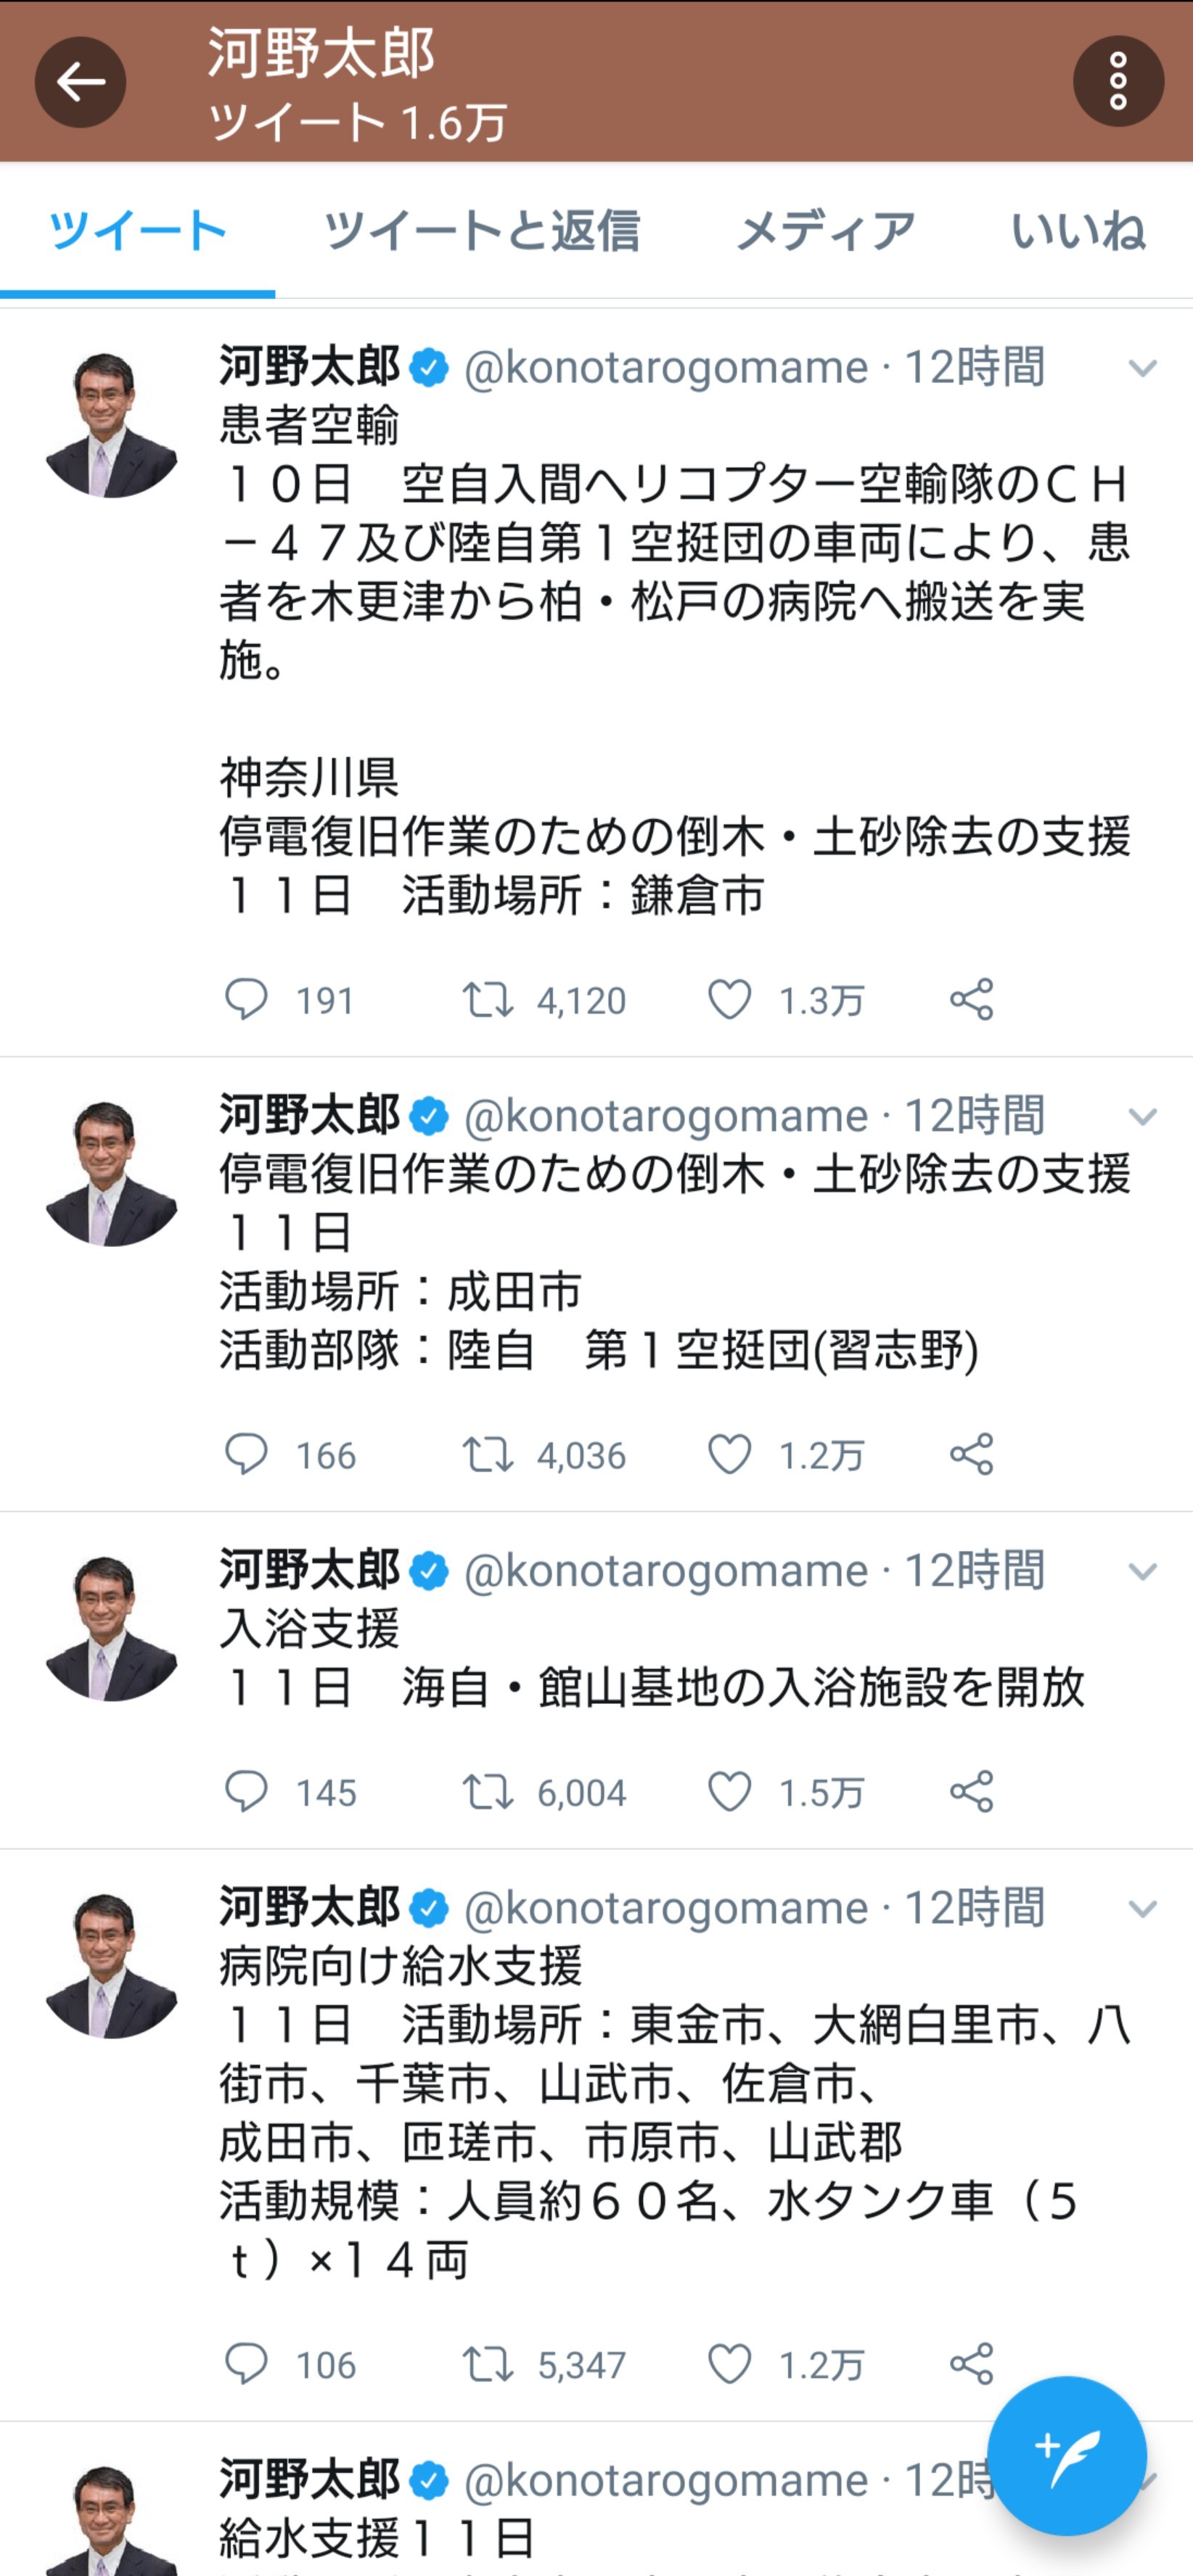 [Good news] Minister of Defense Kono, demonstrating the capability of SDF public relations on twitter